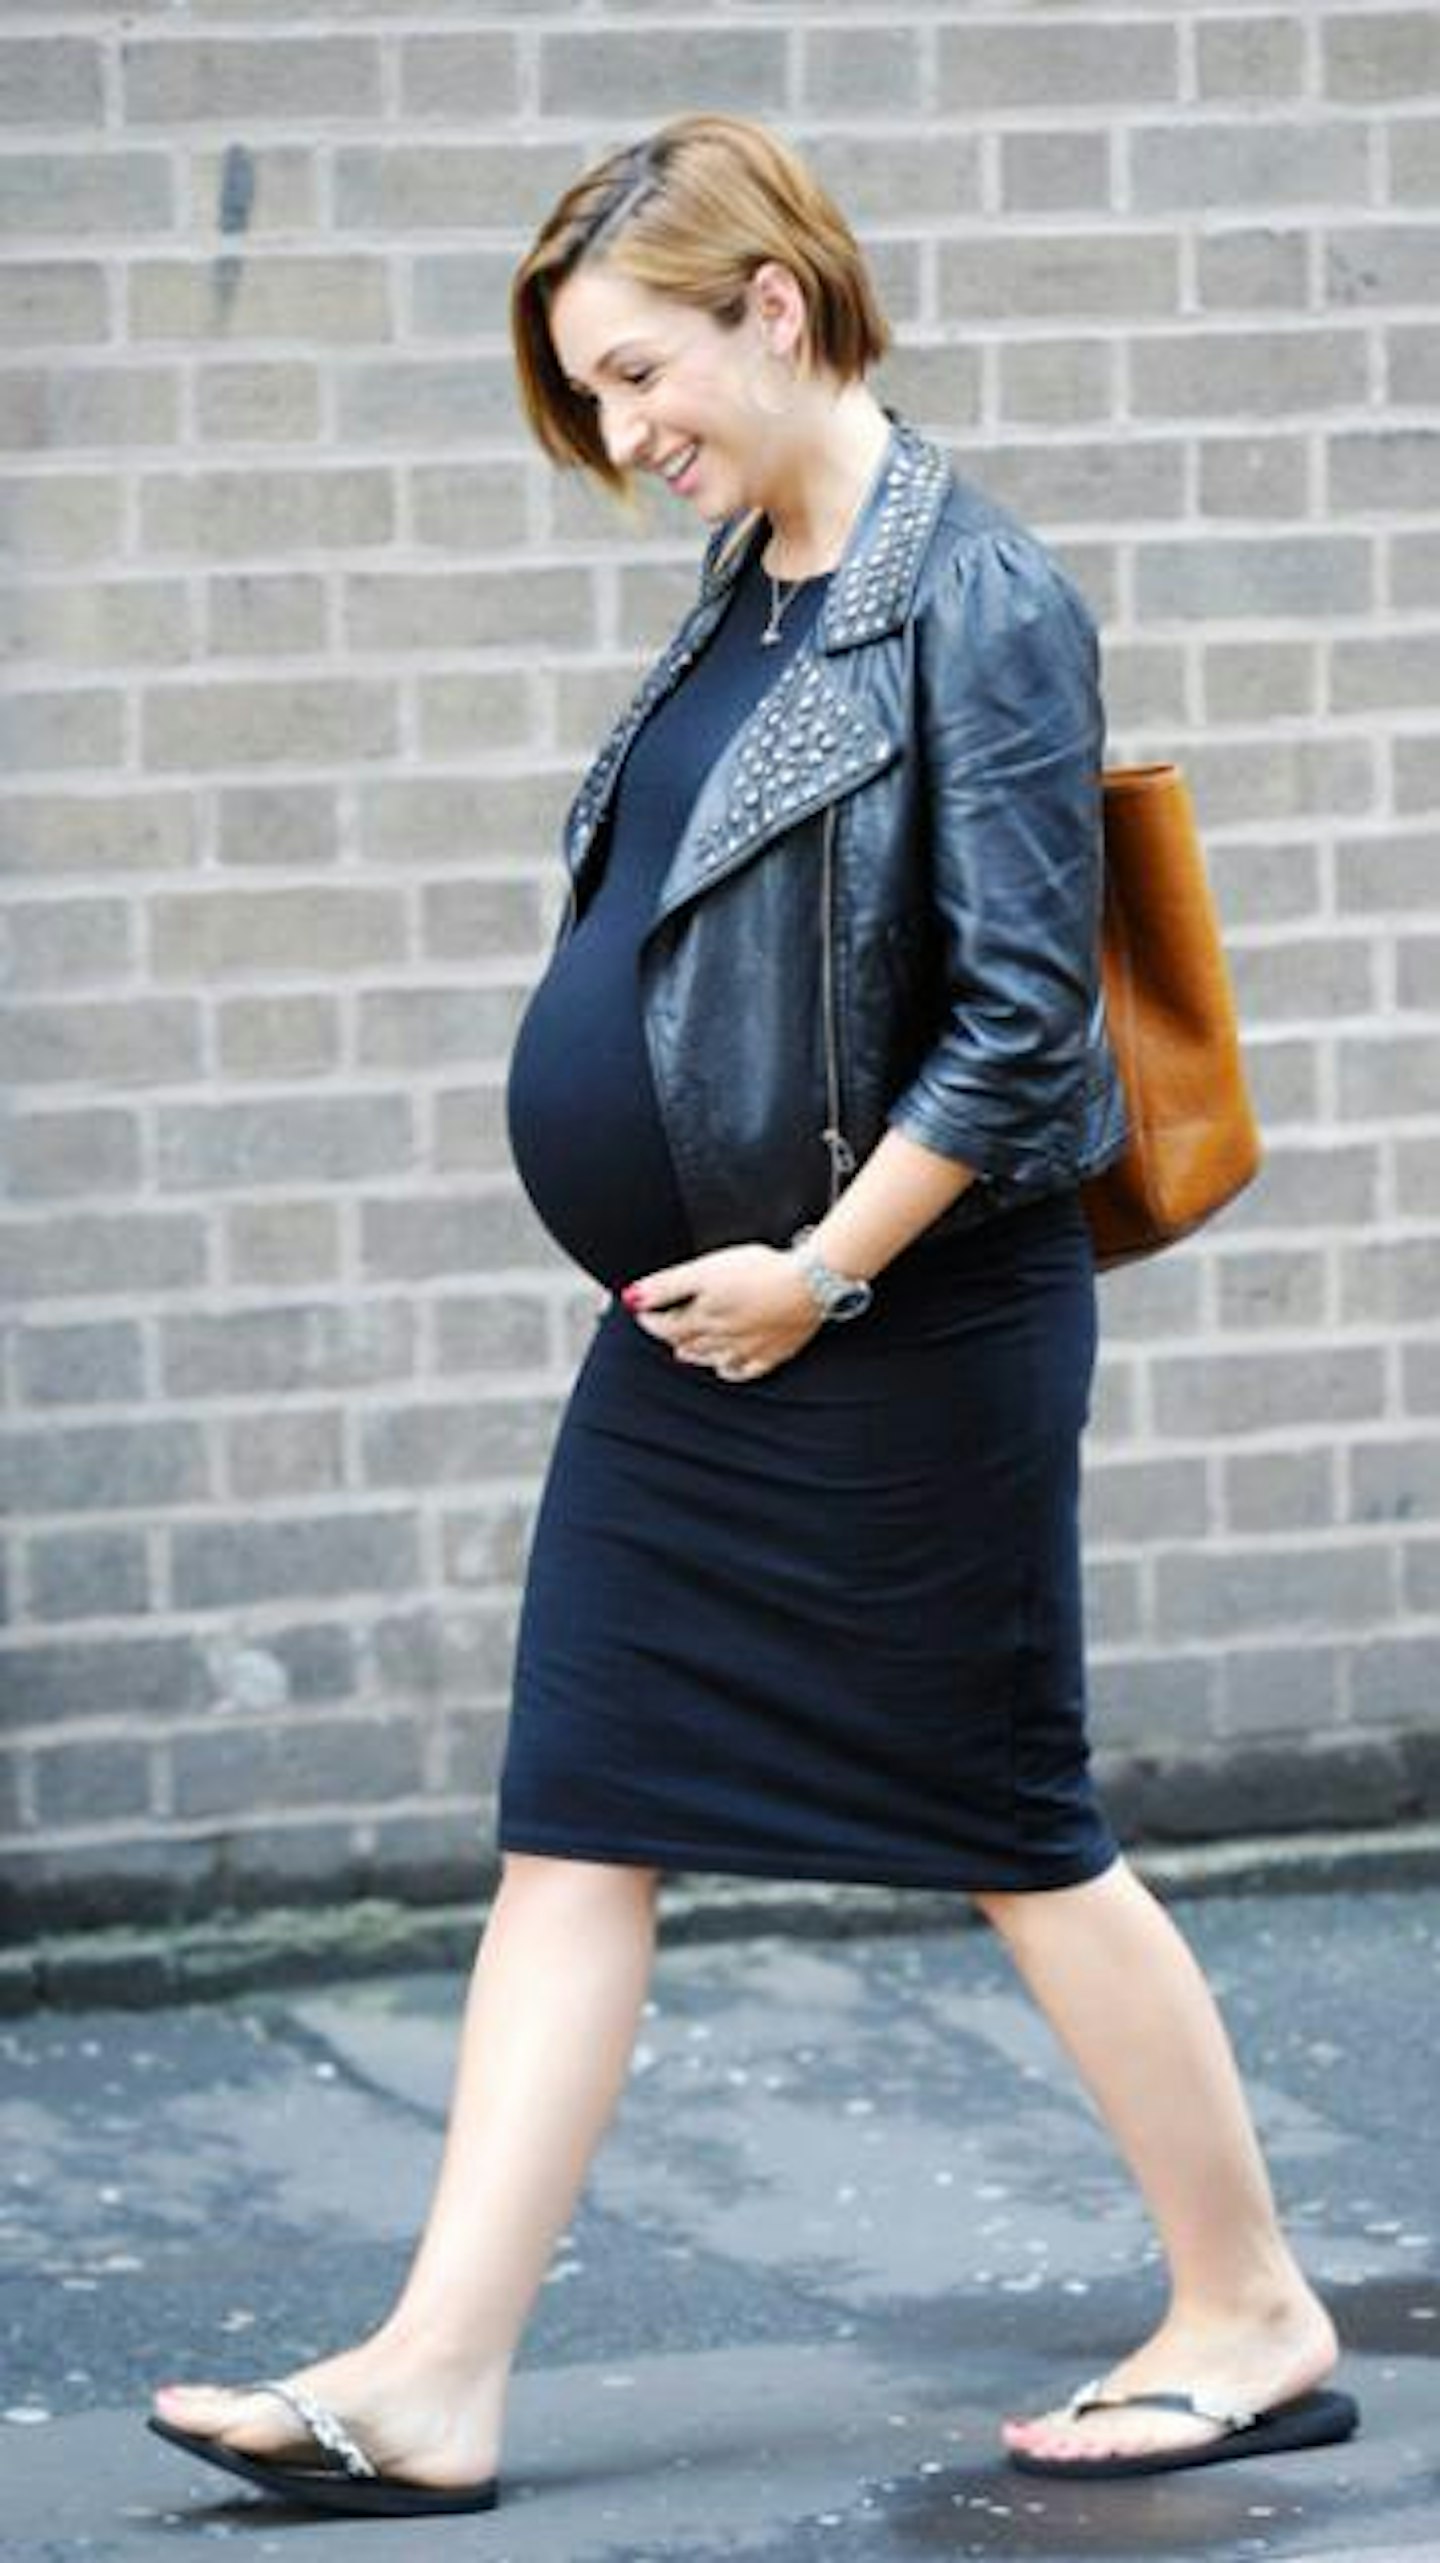 Lucy Jo - pictured last month - gave birth 9 days after her baby's due-date